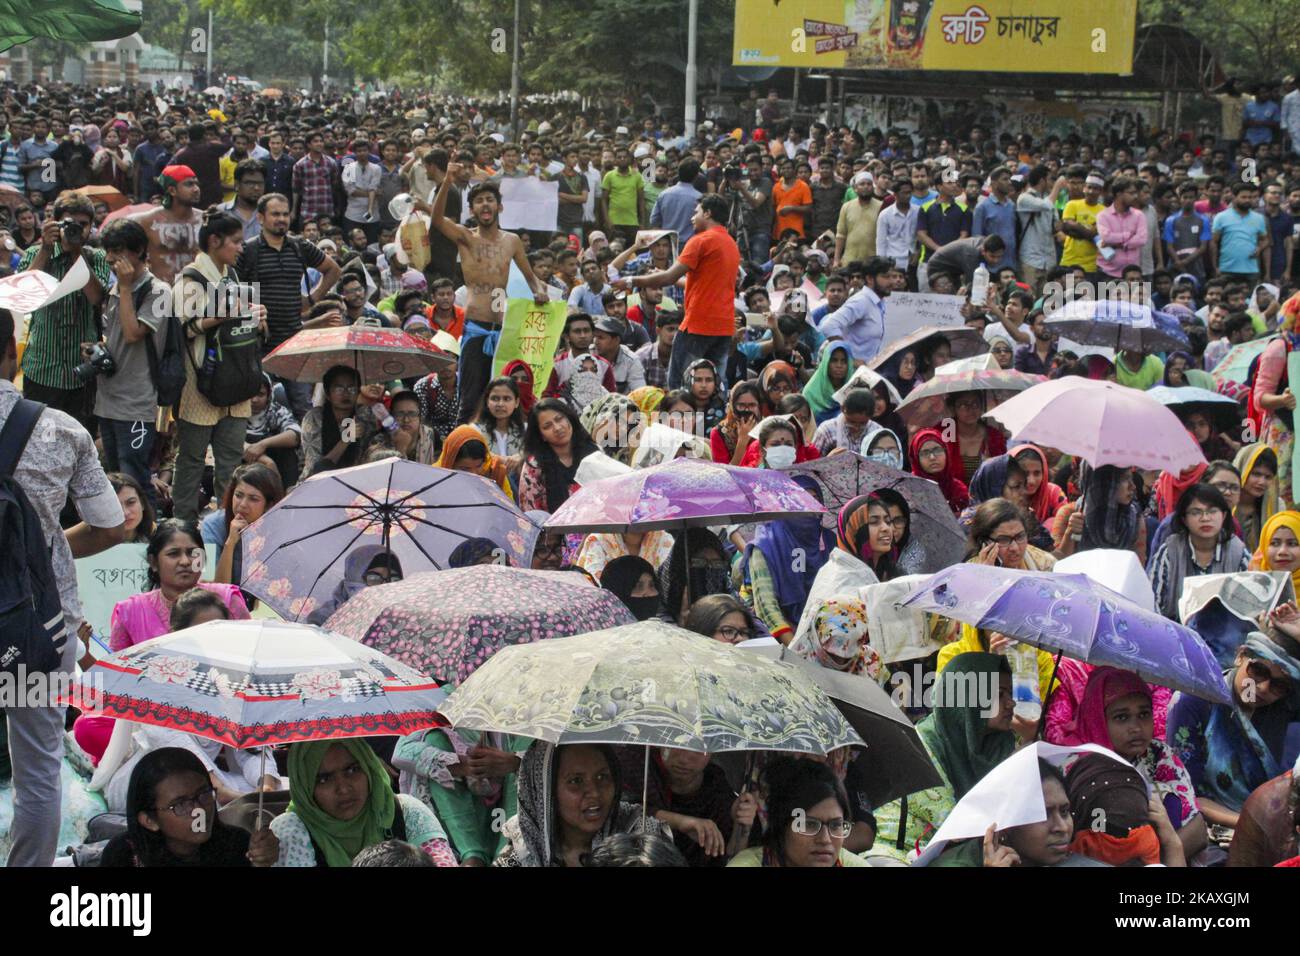 Students and job seekers on their fourth consecutive day of protests at Dhaka University in Dhaka, Bangladesh, on 11 April 2018 for the reform of the quota system for government say they want a â€˜direct statementâ€™ from Prime Minister Sheikh Hasina on the issue. (Photo by Khandaker Azizur Rahman Sumon/NurPhoto) Stock Photo